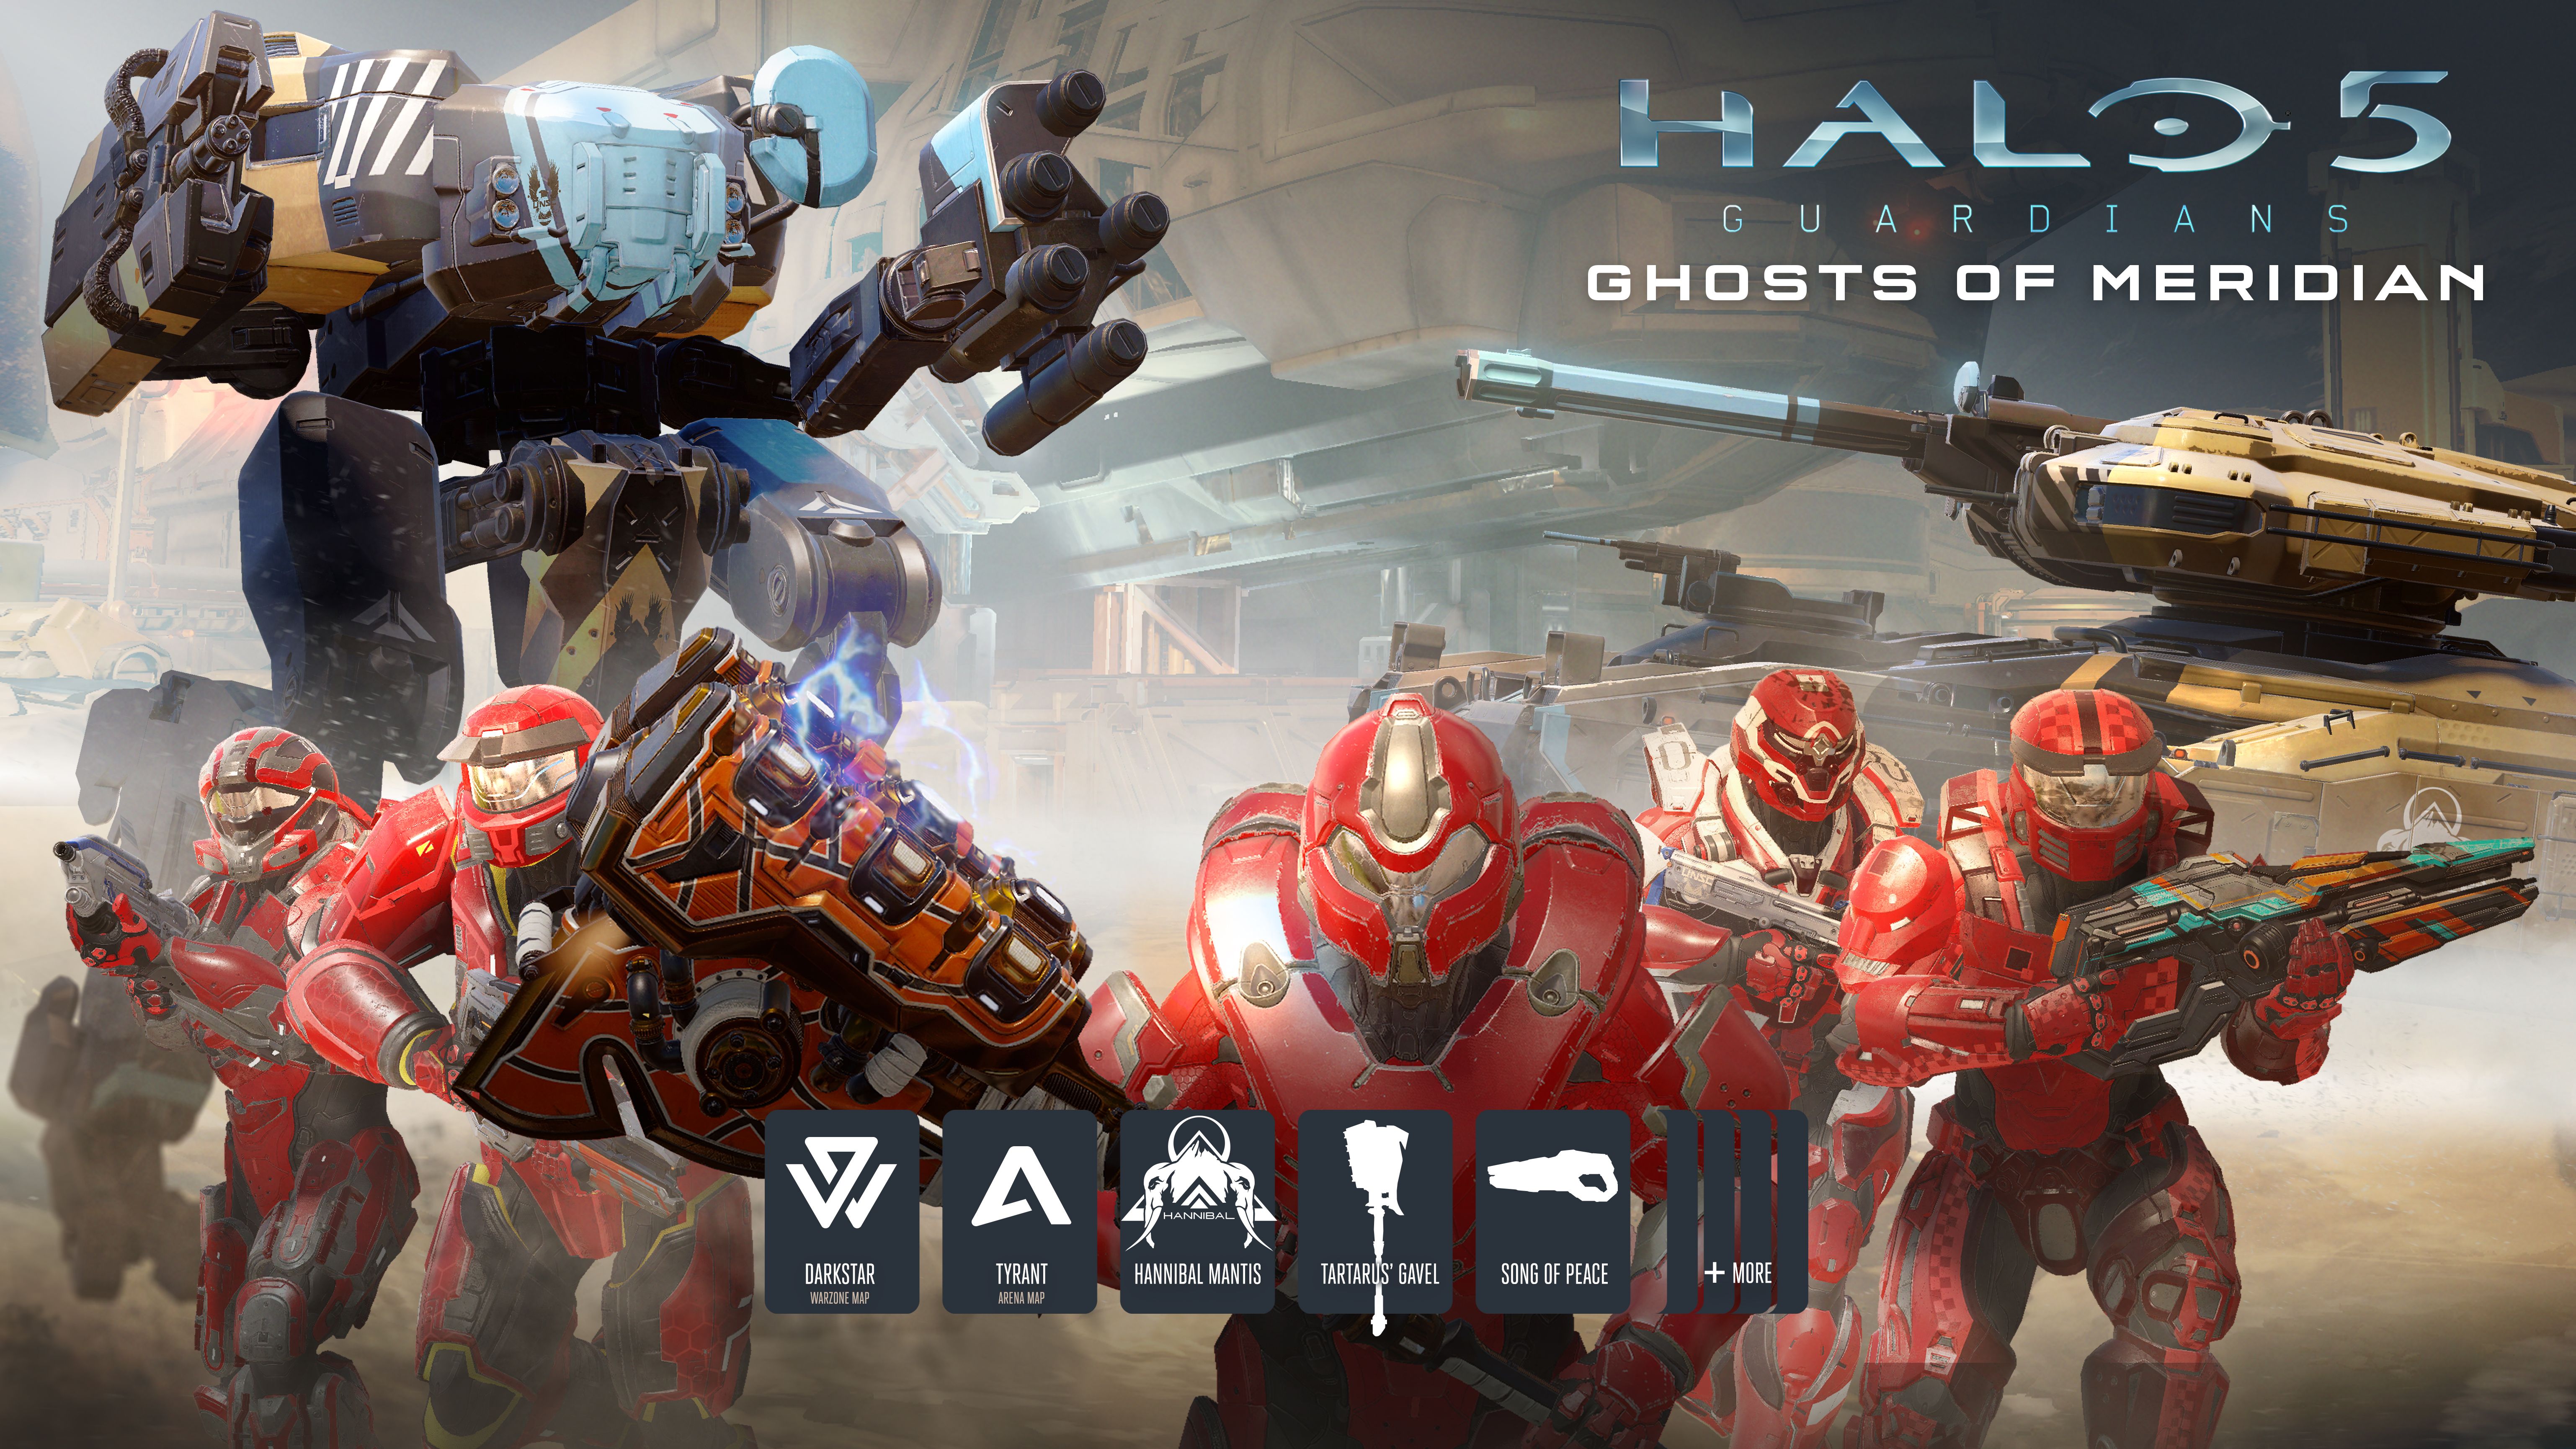 Halo 5: Guardians – Ghosts of Meridian Assets